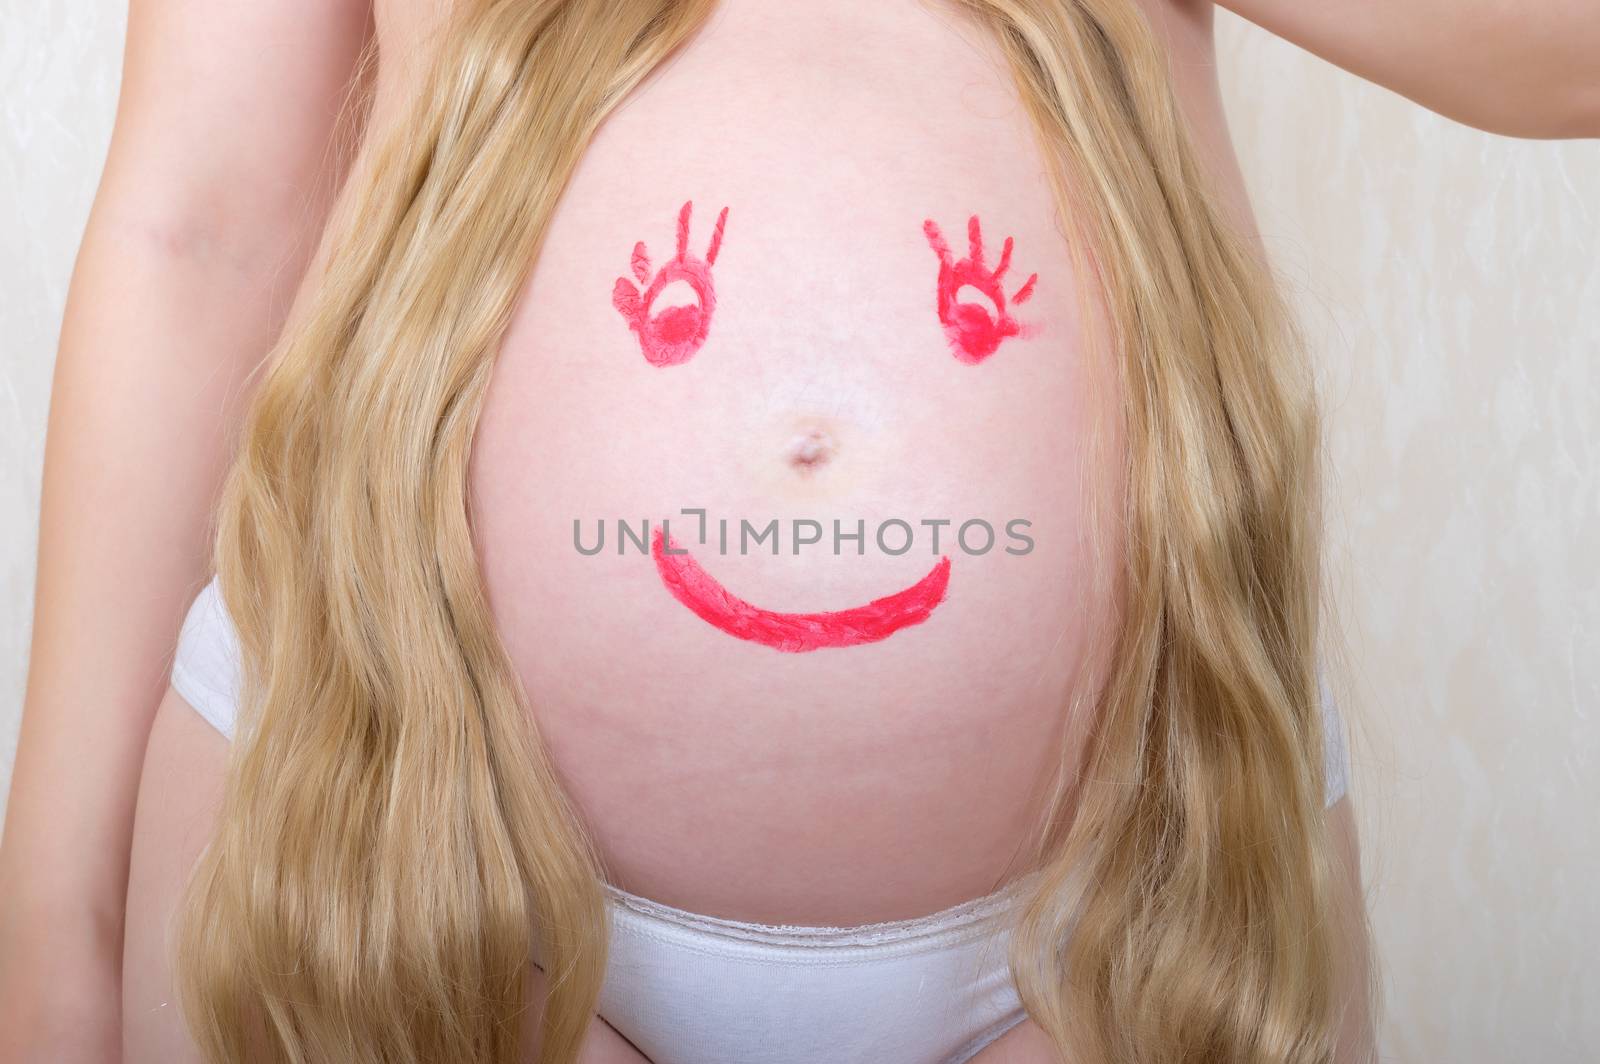 Face drawn in lipstick on a stomach of the pregnant woman